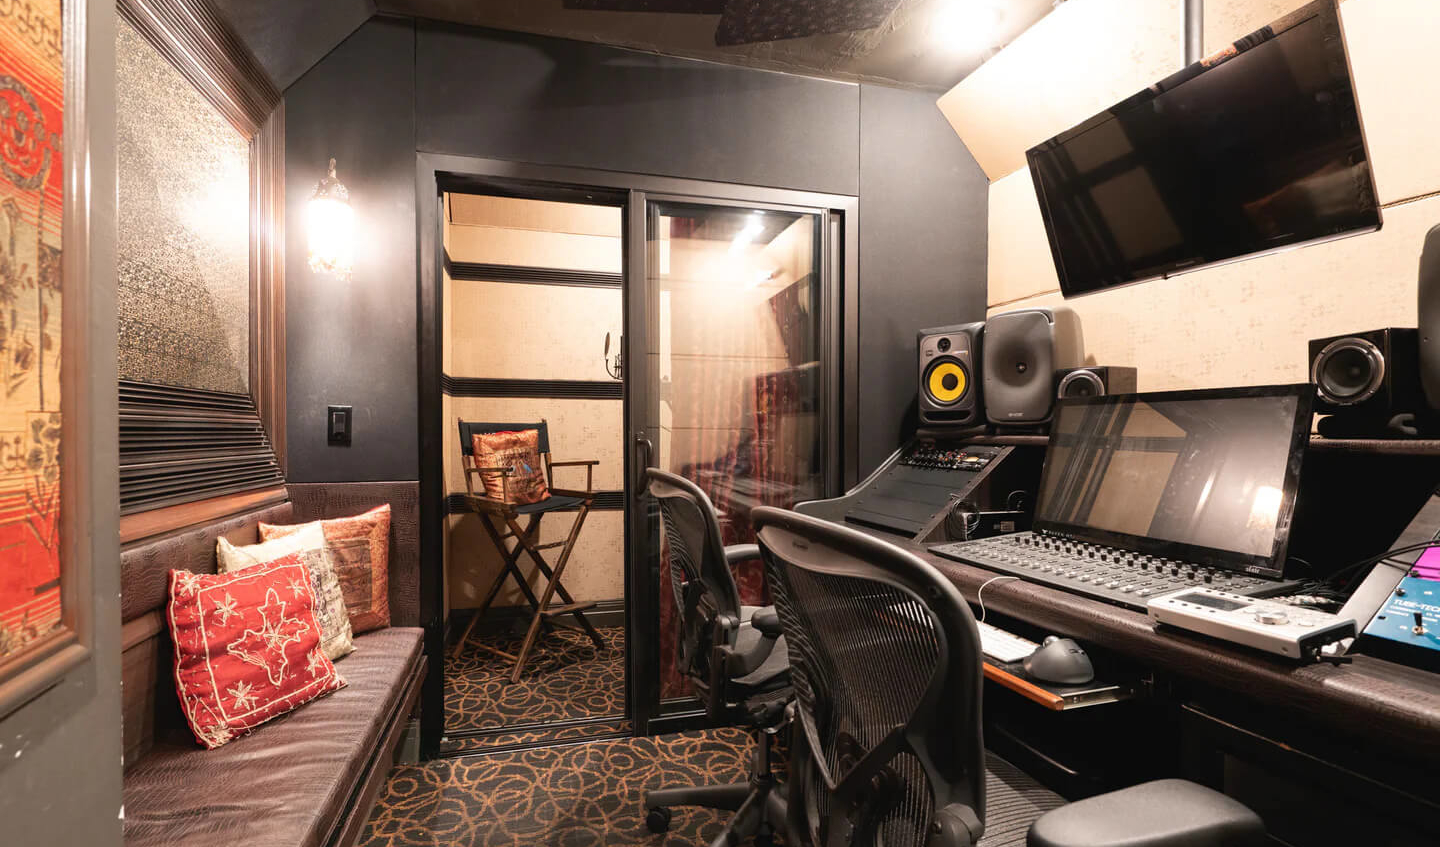 One of the recording studios in House 33 (Image: Team 33)